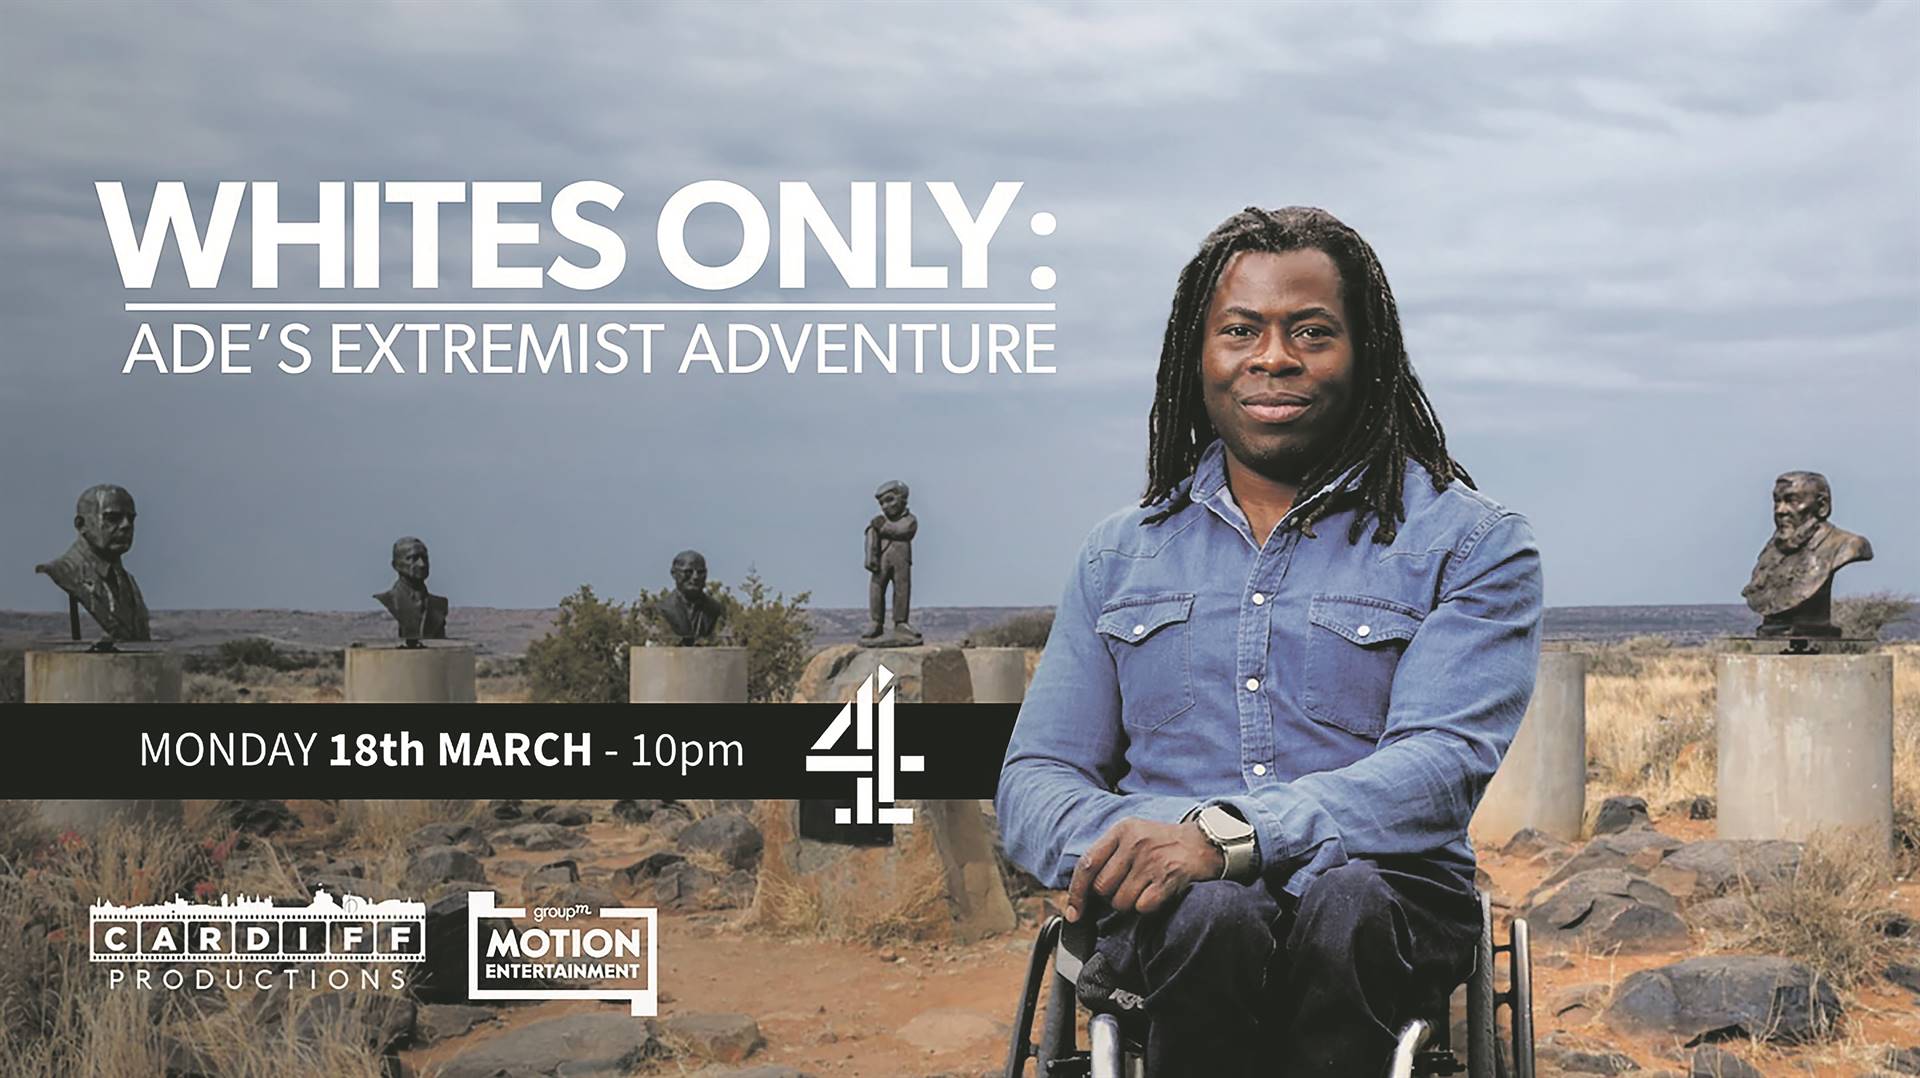 South Africa’s ‘whites only’ town, Paralympian Ade Adepitan claims he is the first black person to stay in the remote Afrikaner community of Orania for more than a week